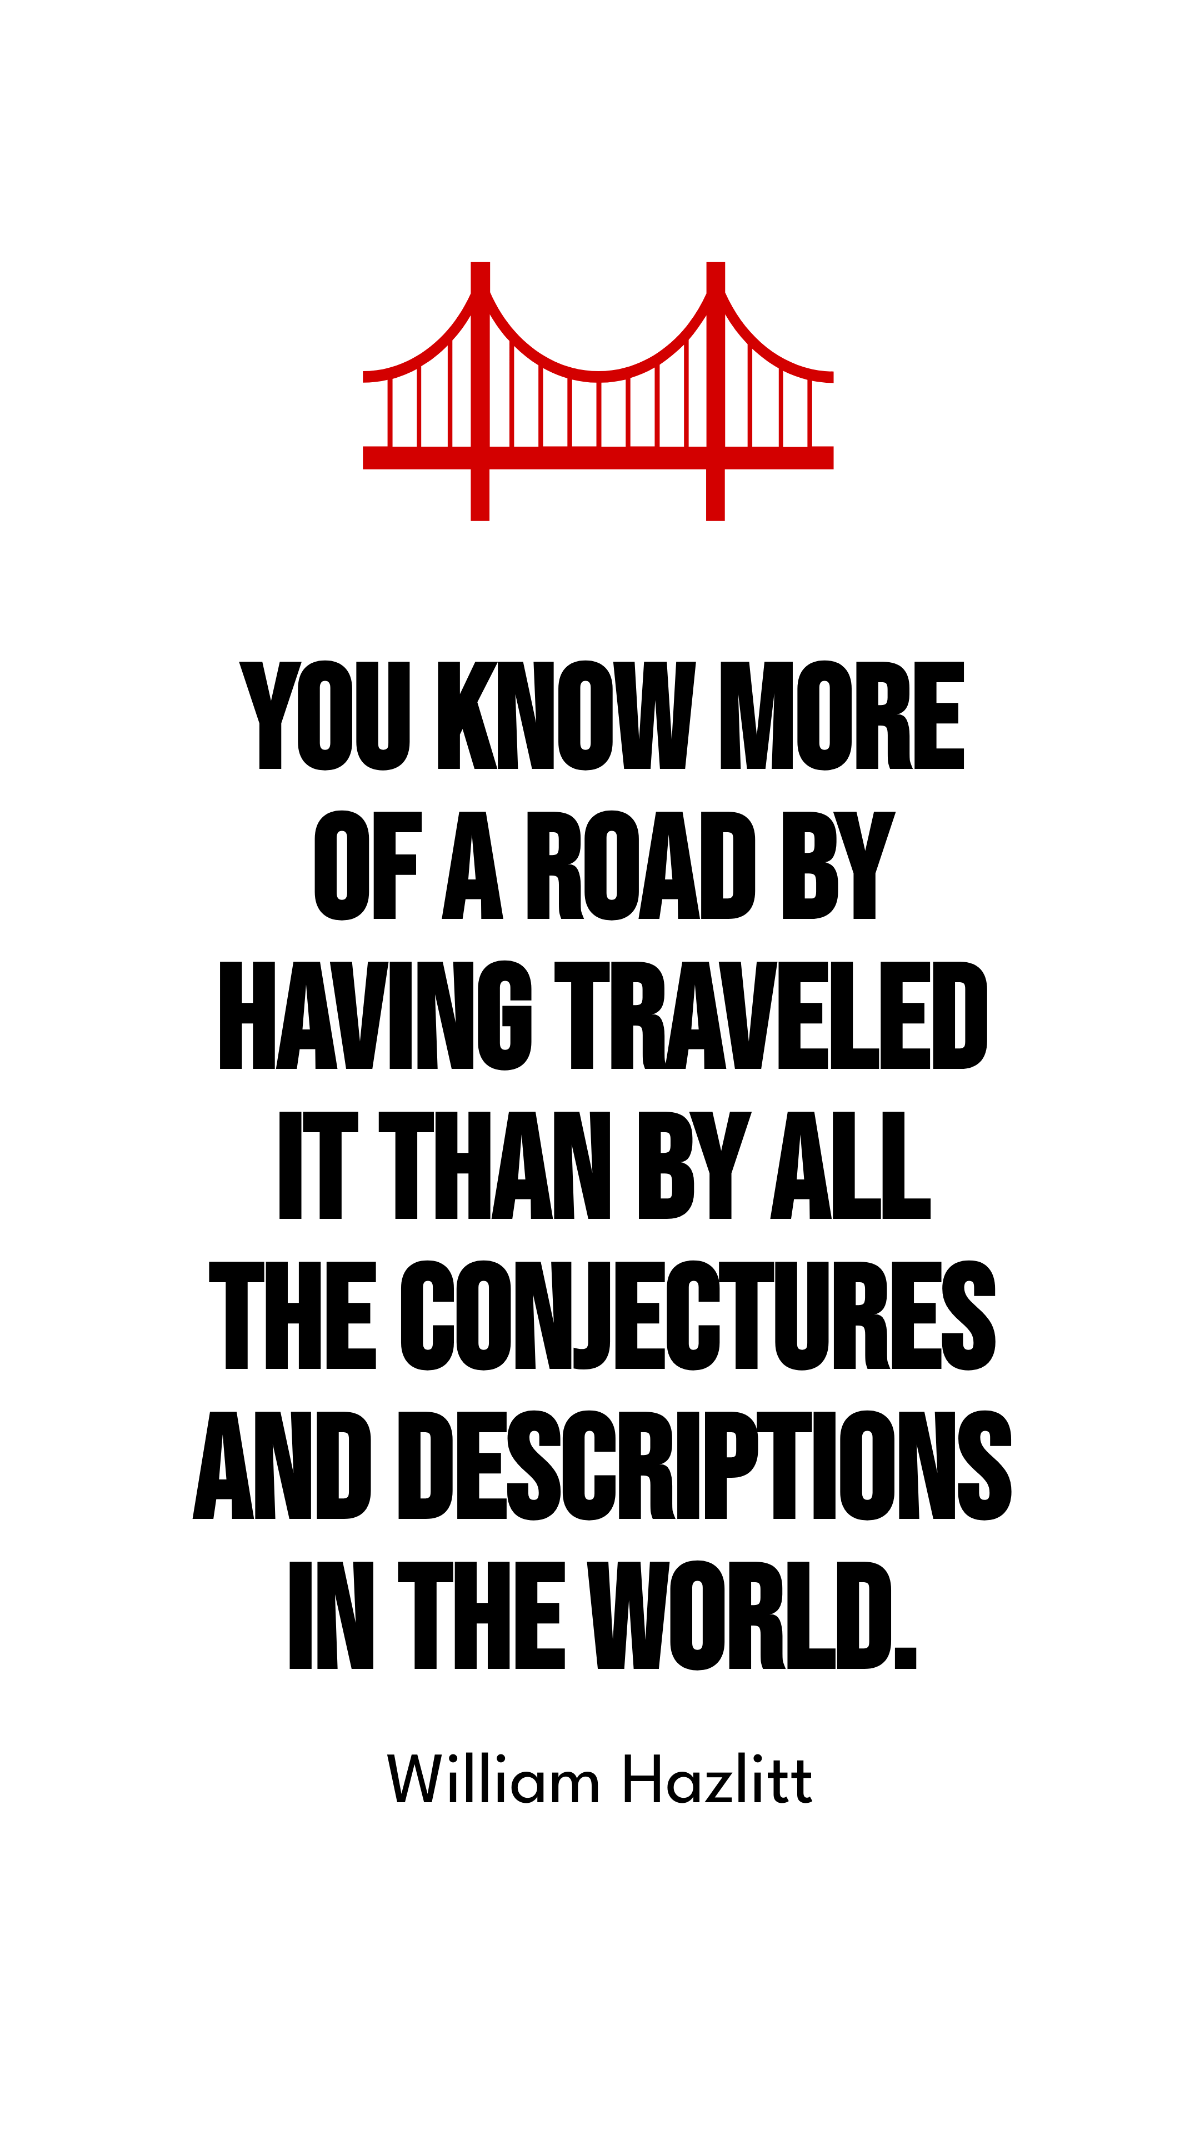 Free William Hazlitt - You know more of a road by having traveled it than by all the conjectures and descriptions in the world. Template